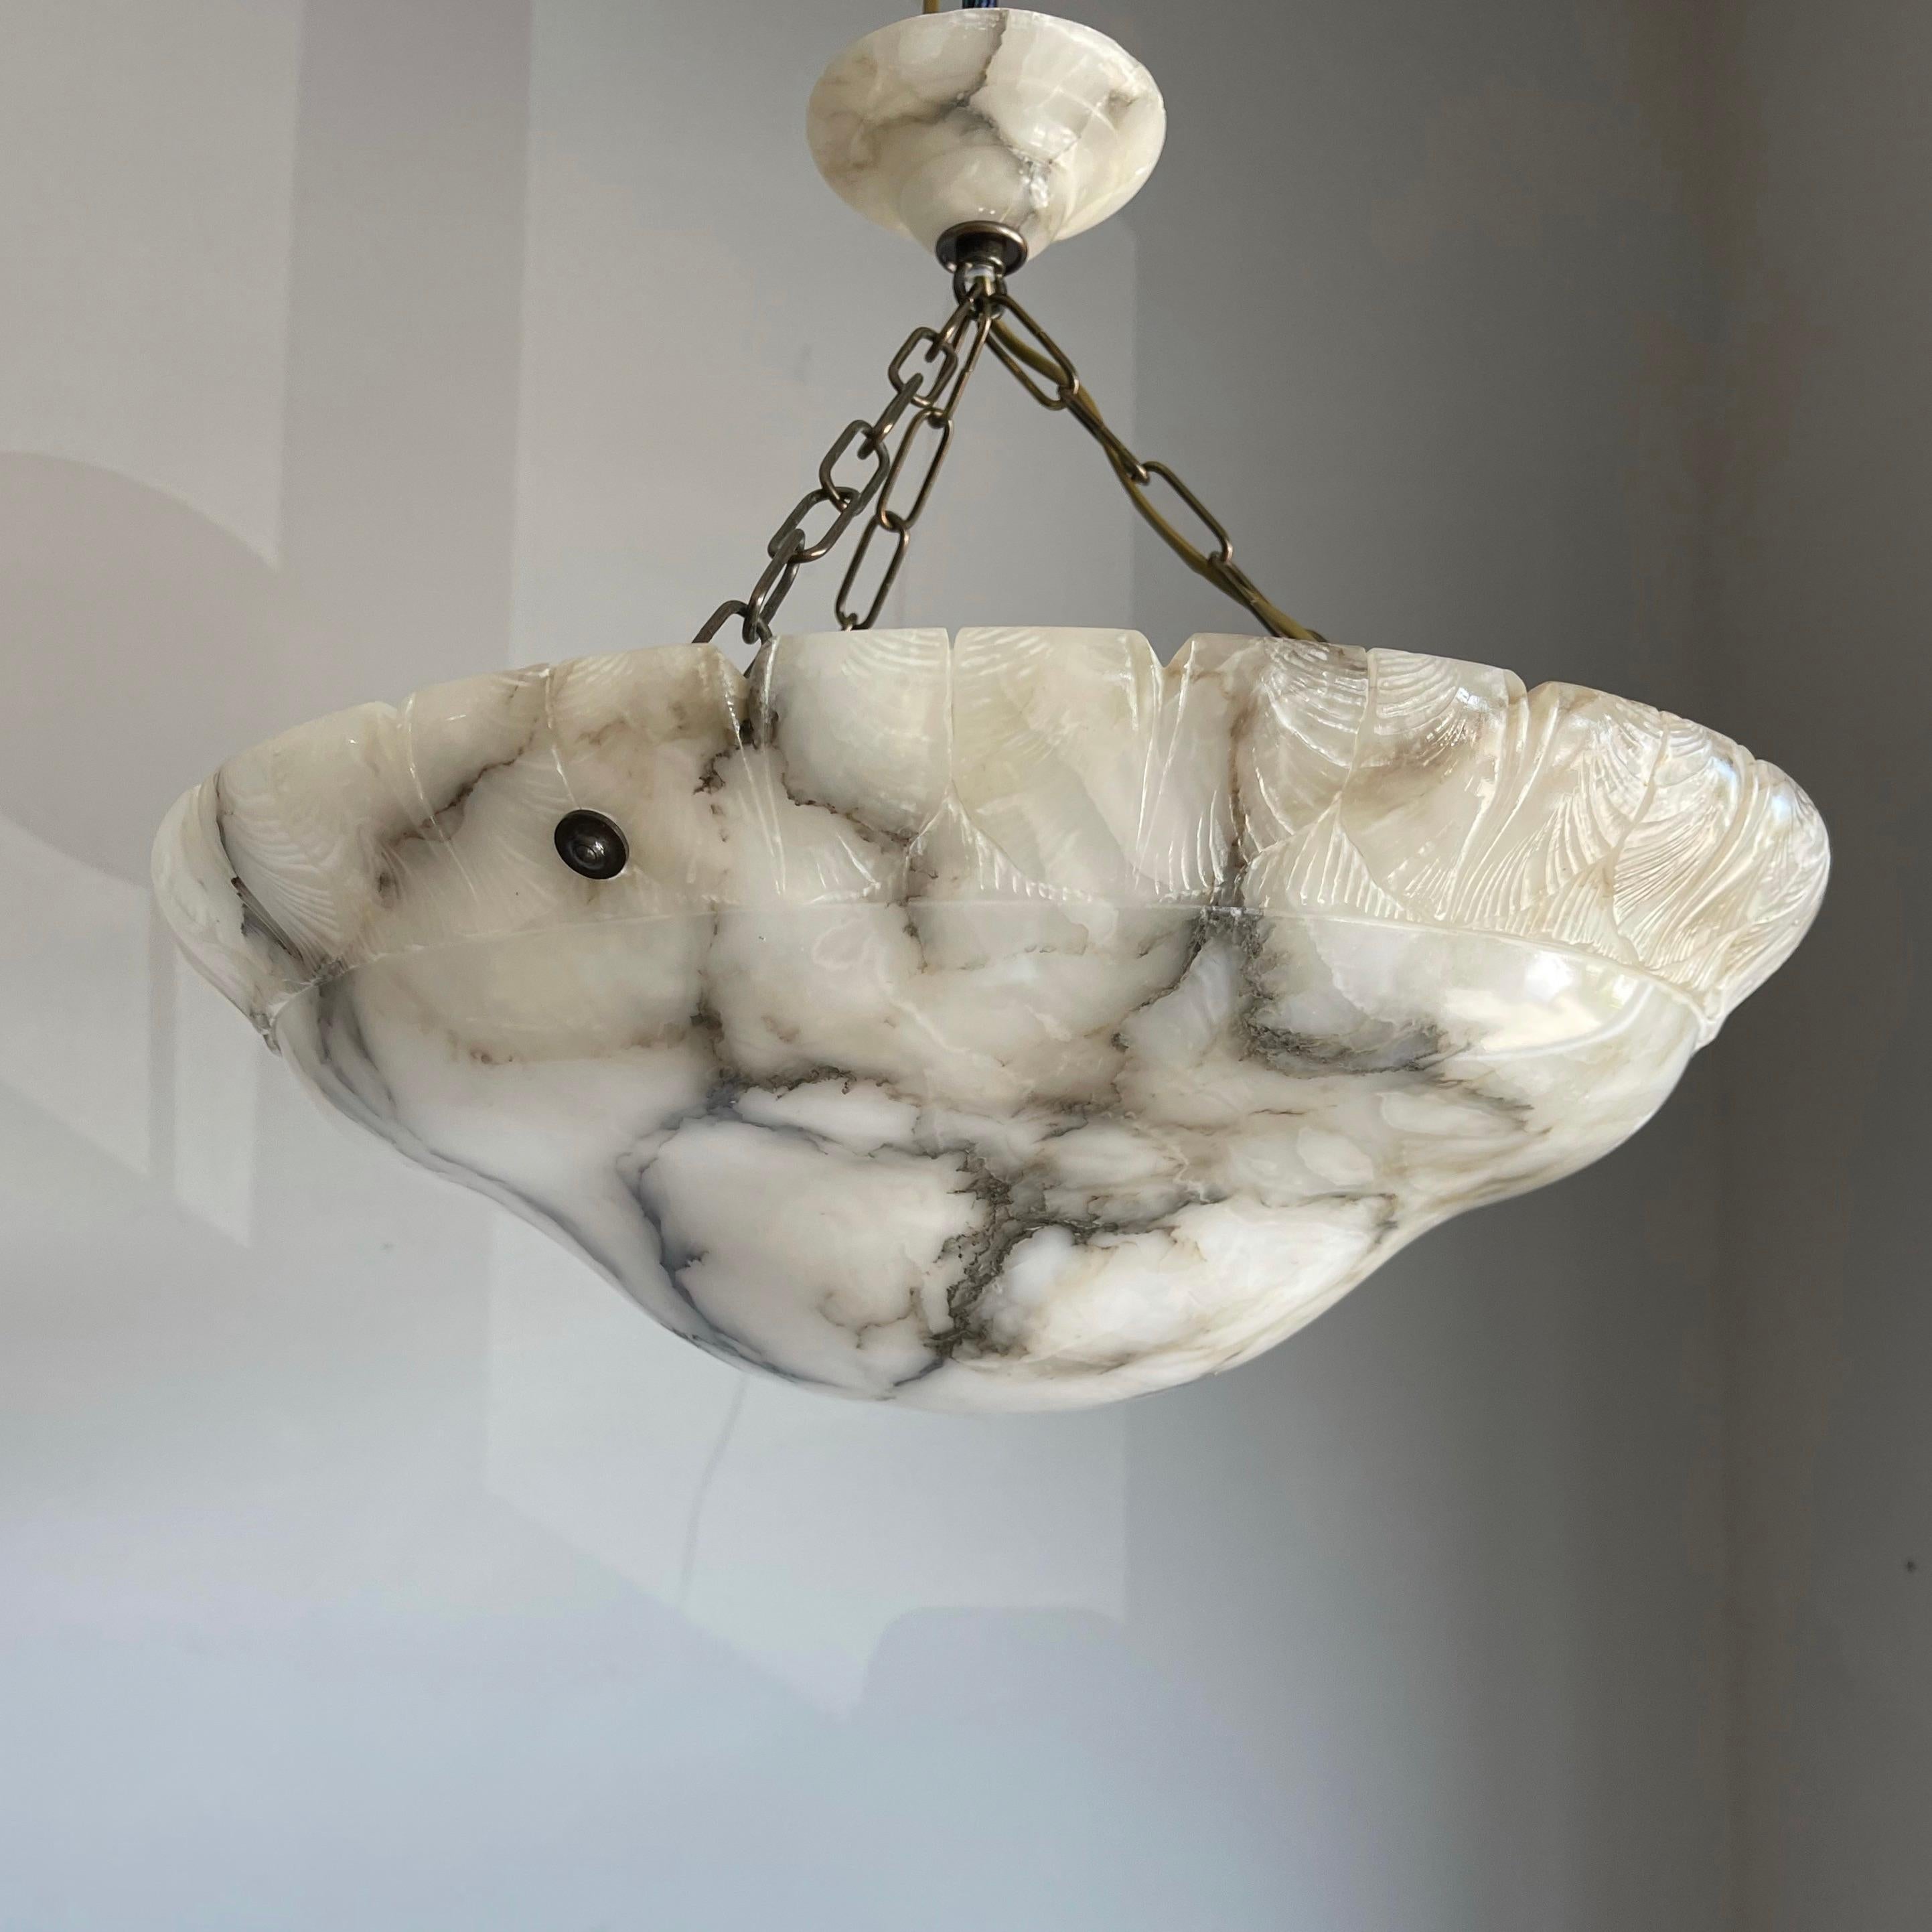 Superb condition marble chandelier with a stunning and great size alabaster mineral stone shade.

Thanks to its large size, deep shape and remarkable design this alabaster chandelier will light up both your days and evenings. It is in excellent